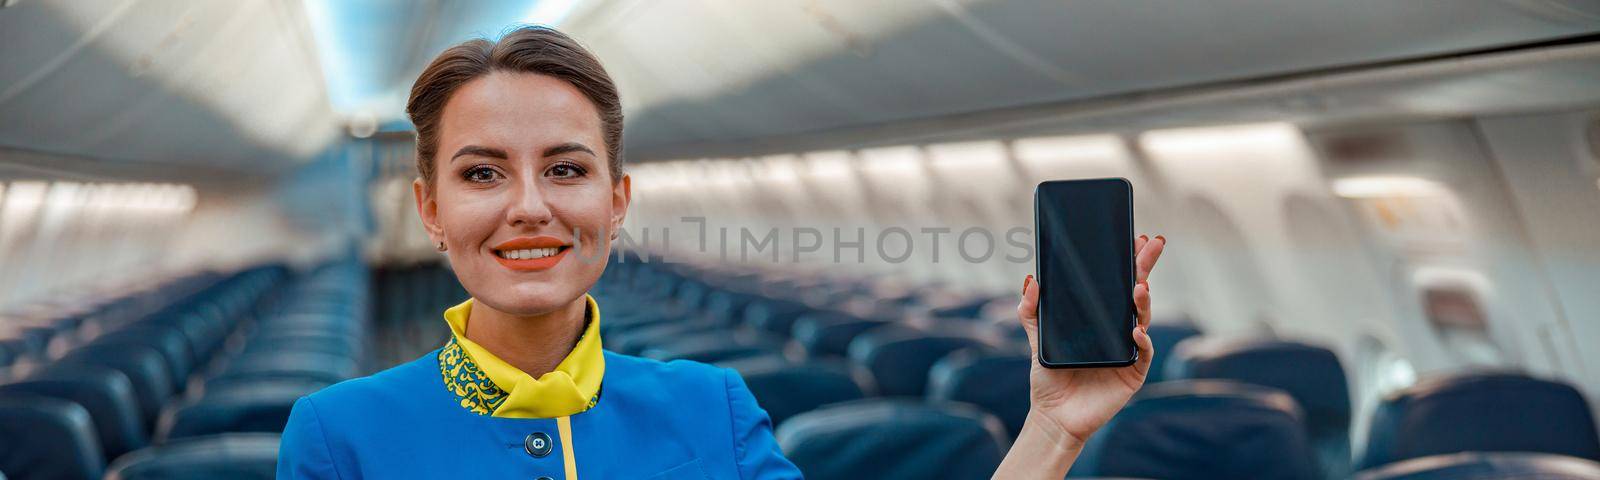 Smiling woman flight attendant holding mobile phone and pointing at passenger seat while standing in aircraft salon